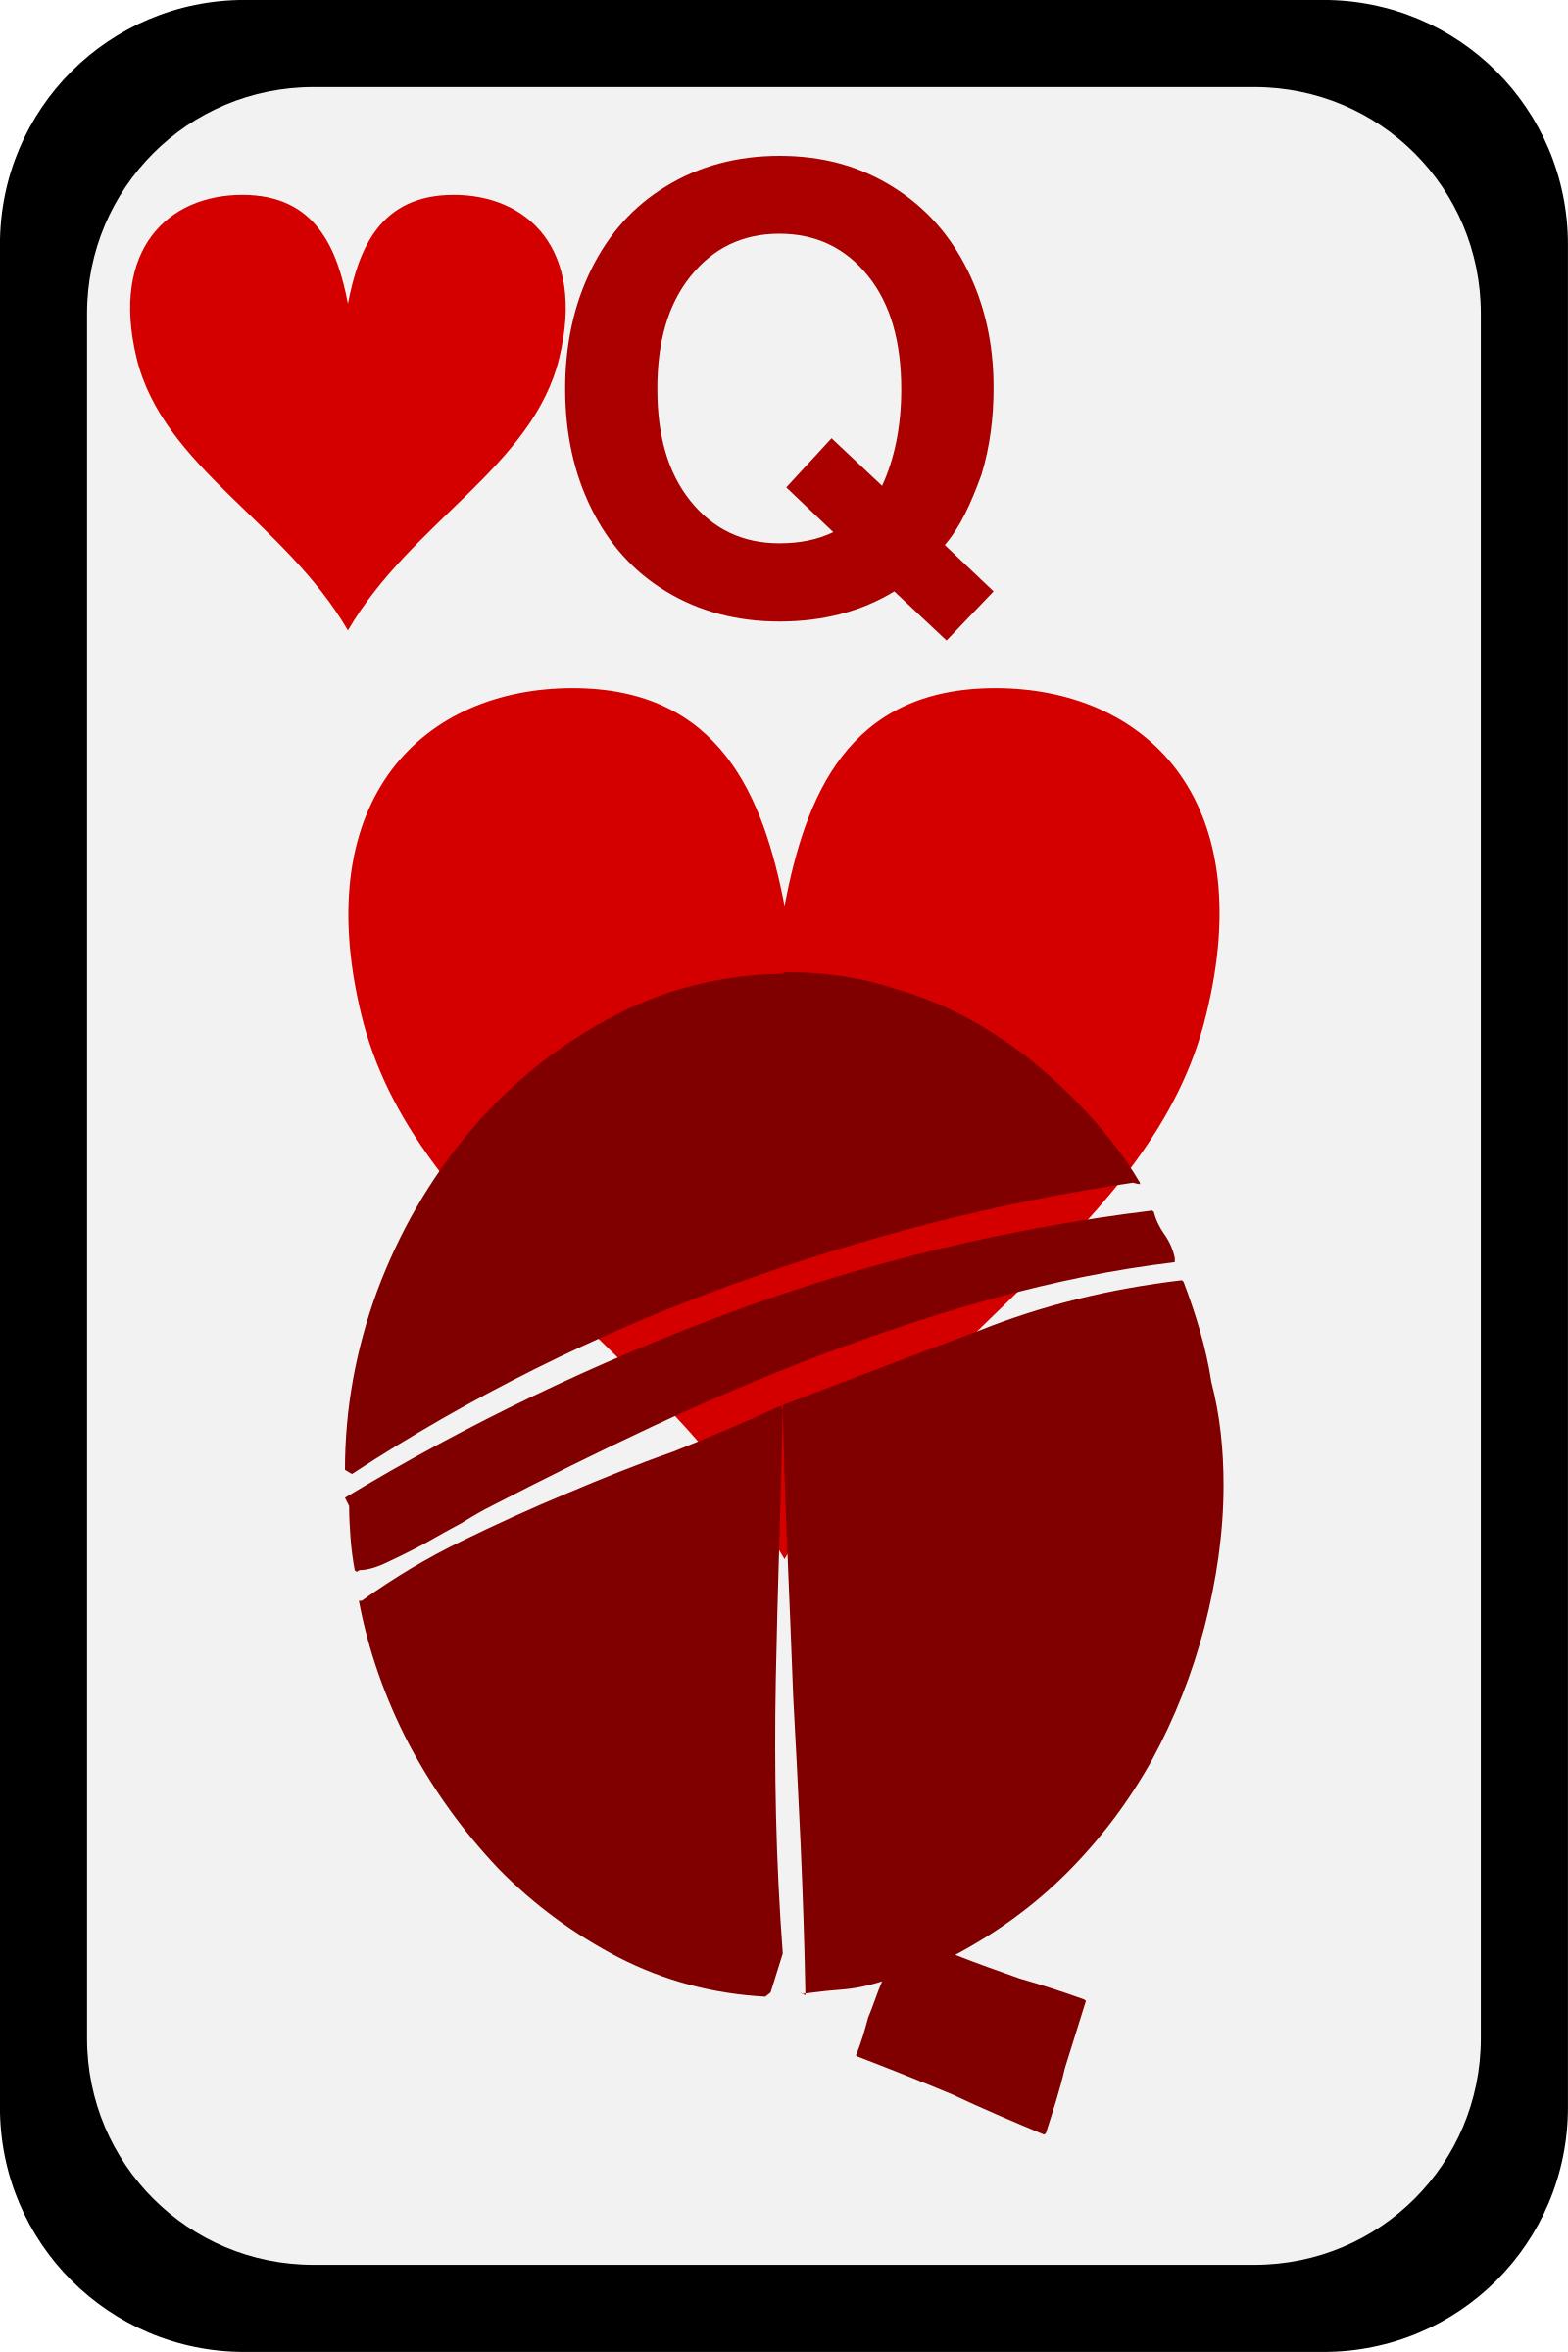 Queen of Hearts PNG icons